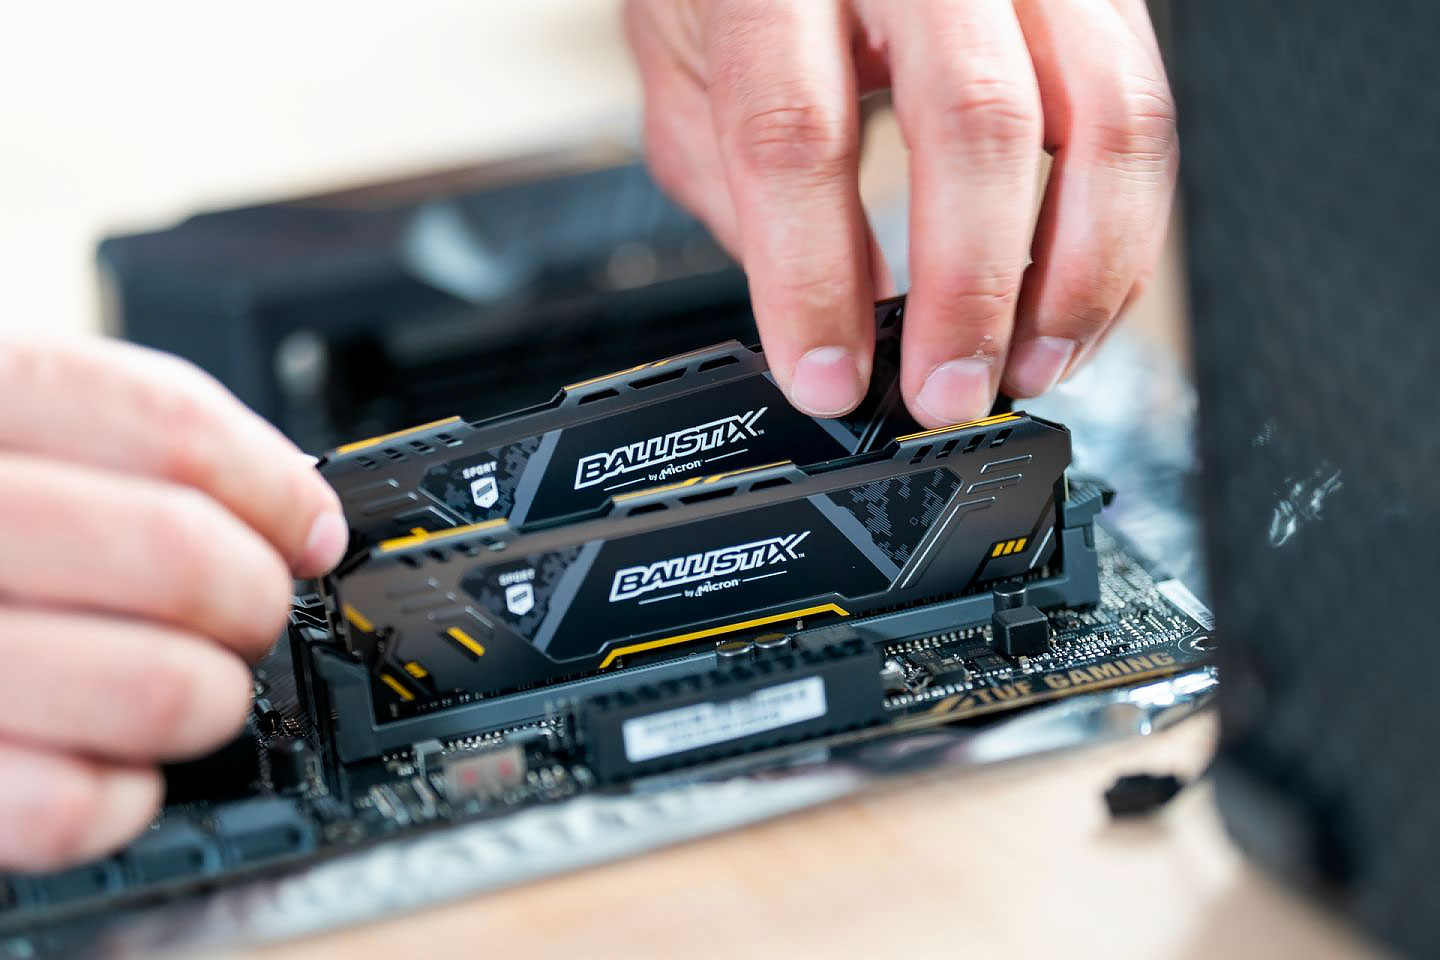 Ballistix gamer memory being placed in a motherboard